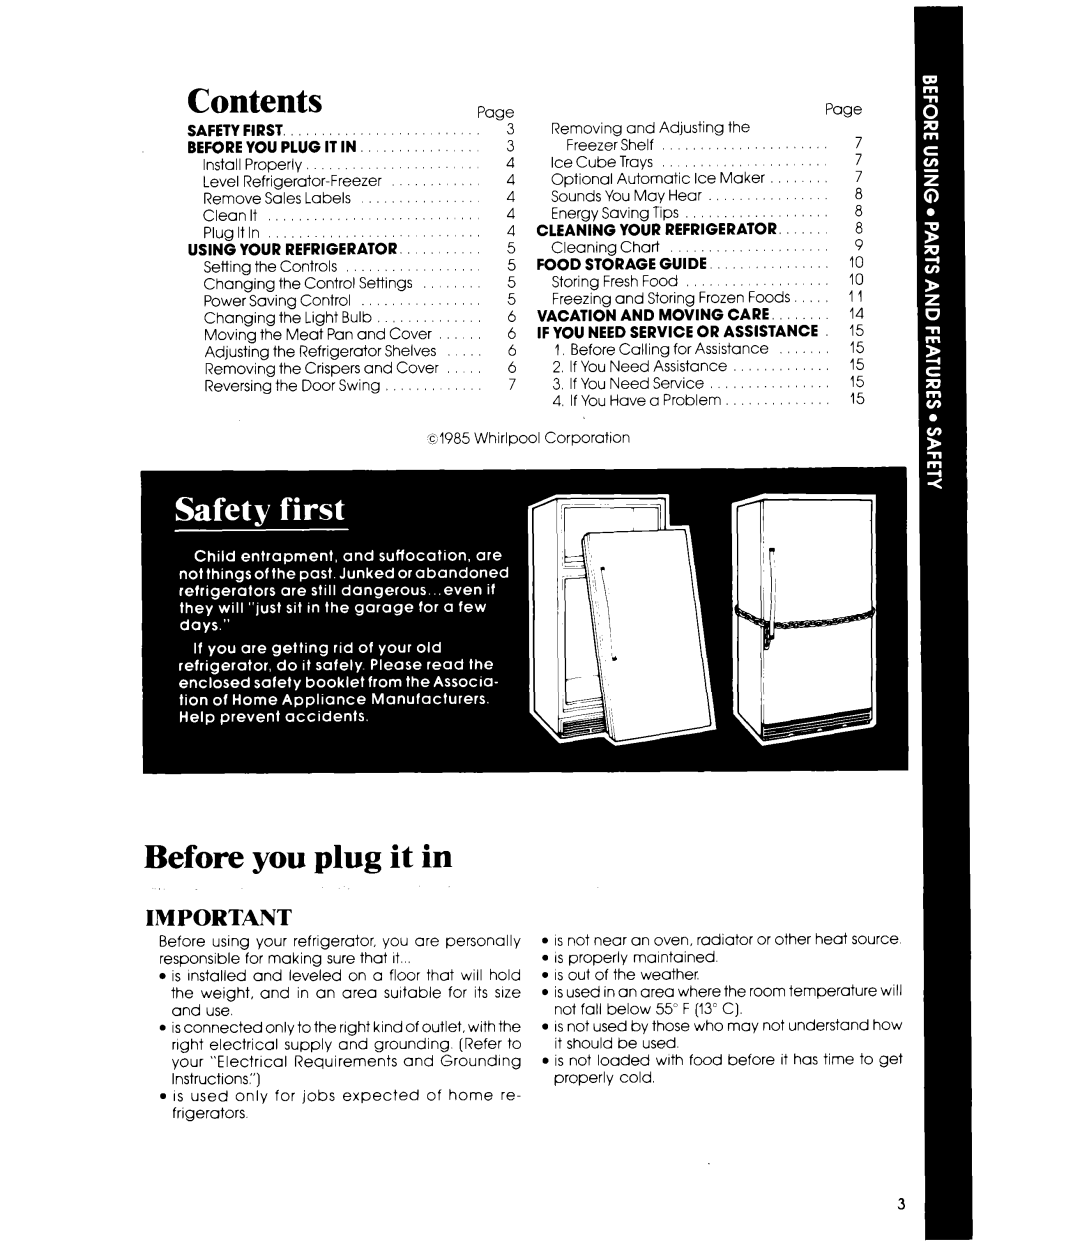 Whirlpool ETl8PKXP manual Contents, Before you plug it in, Beforeyou Plug It In, Cleaning Your Refrigerator 